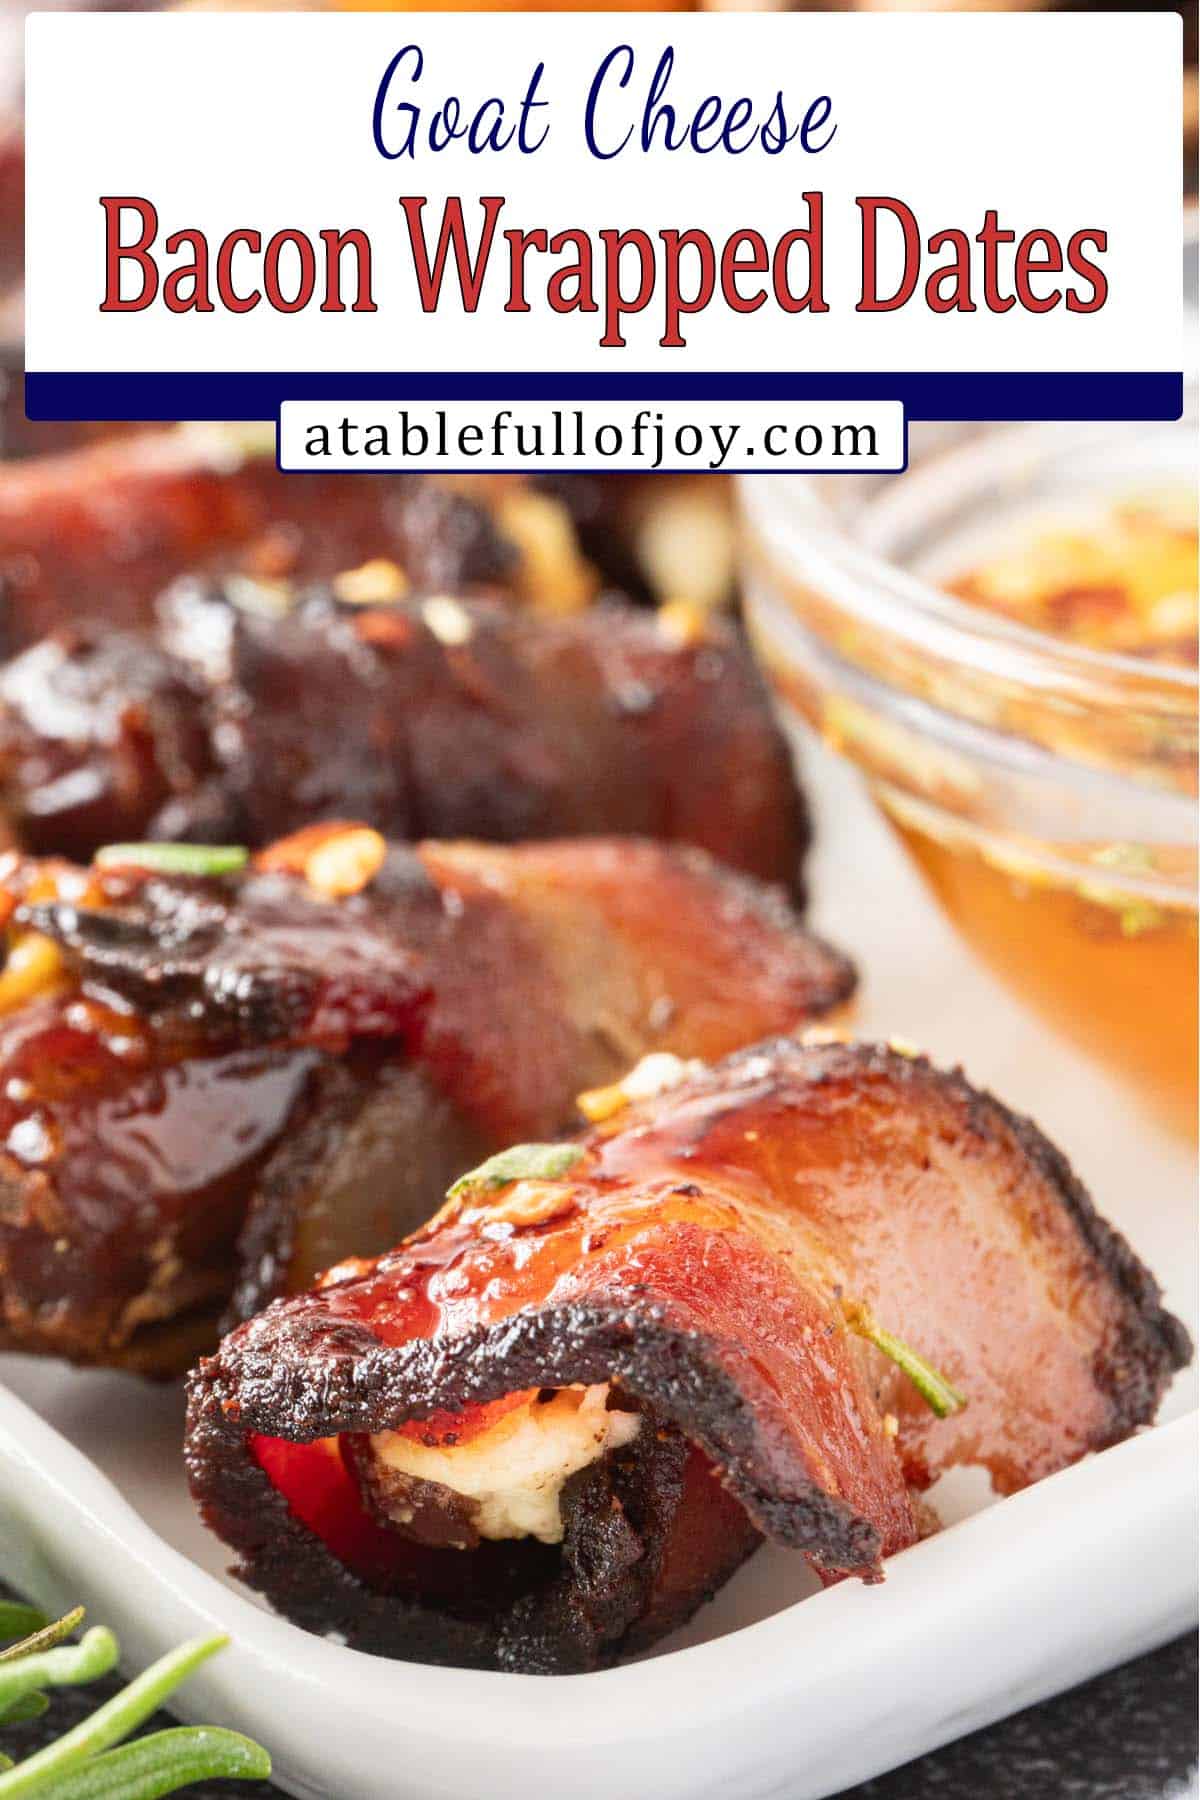 bacon wrapped dates Pinterest pin